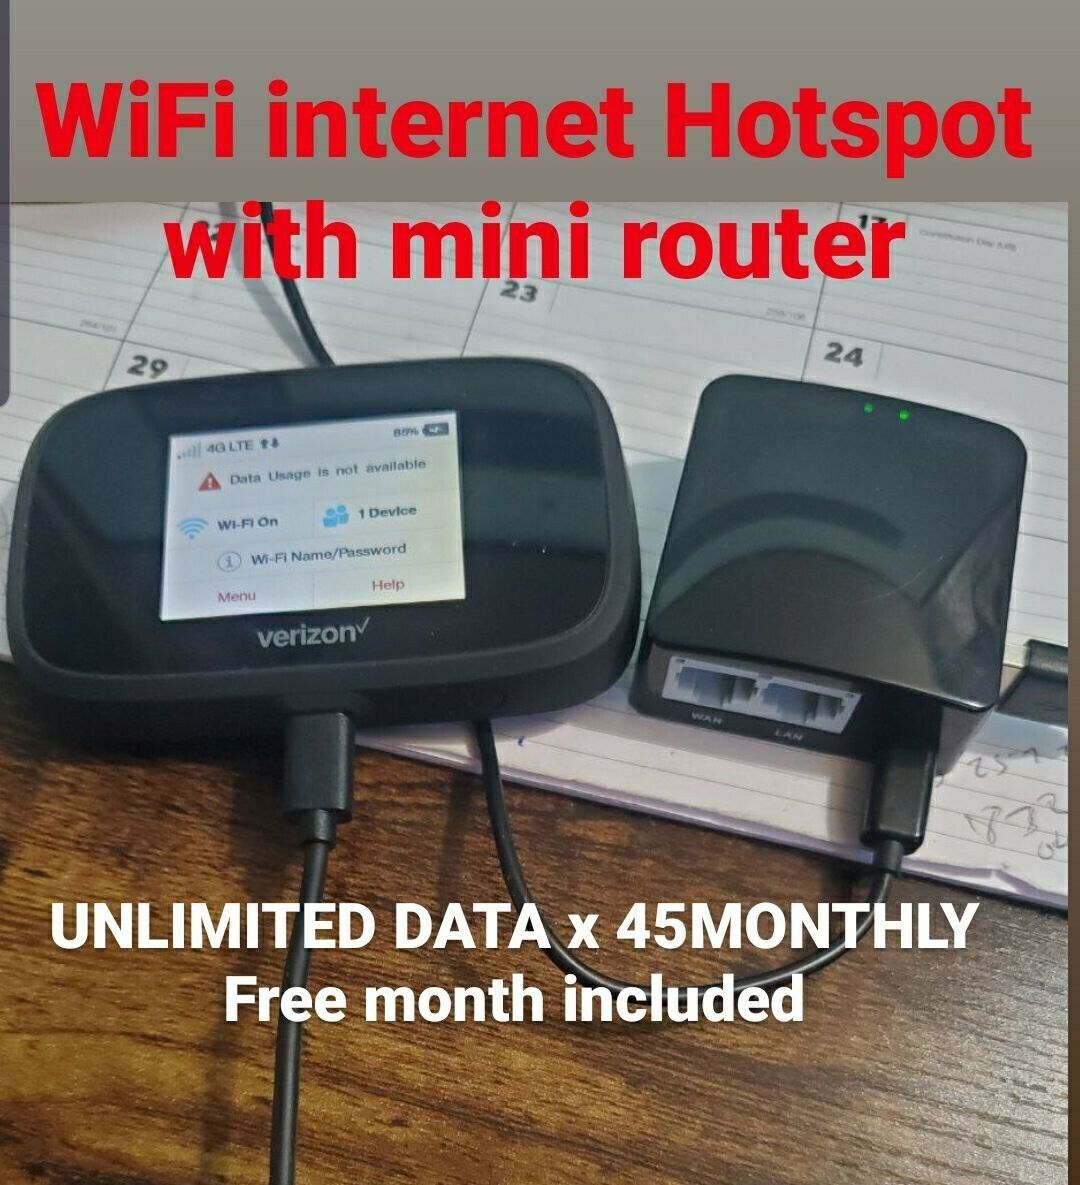 wifi hotspot unlimited service Data 45monthly with mini router free monthservice